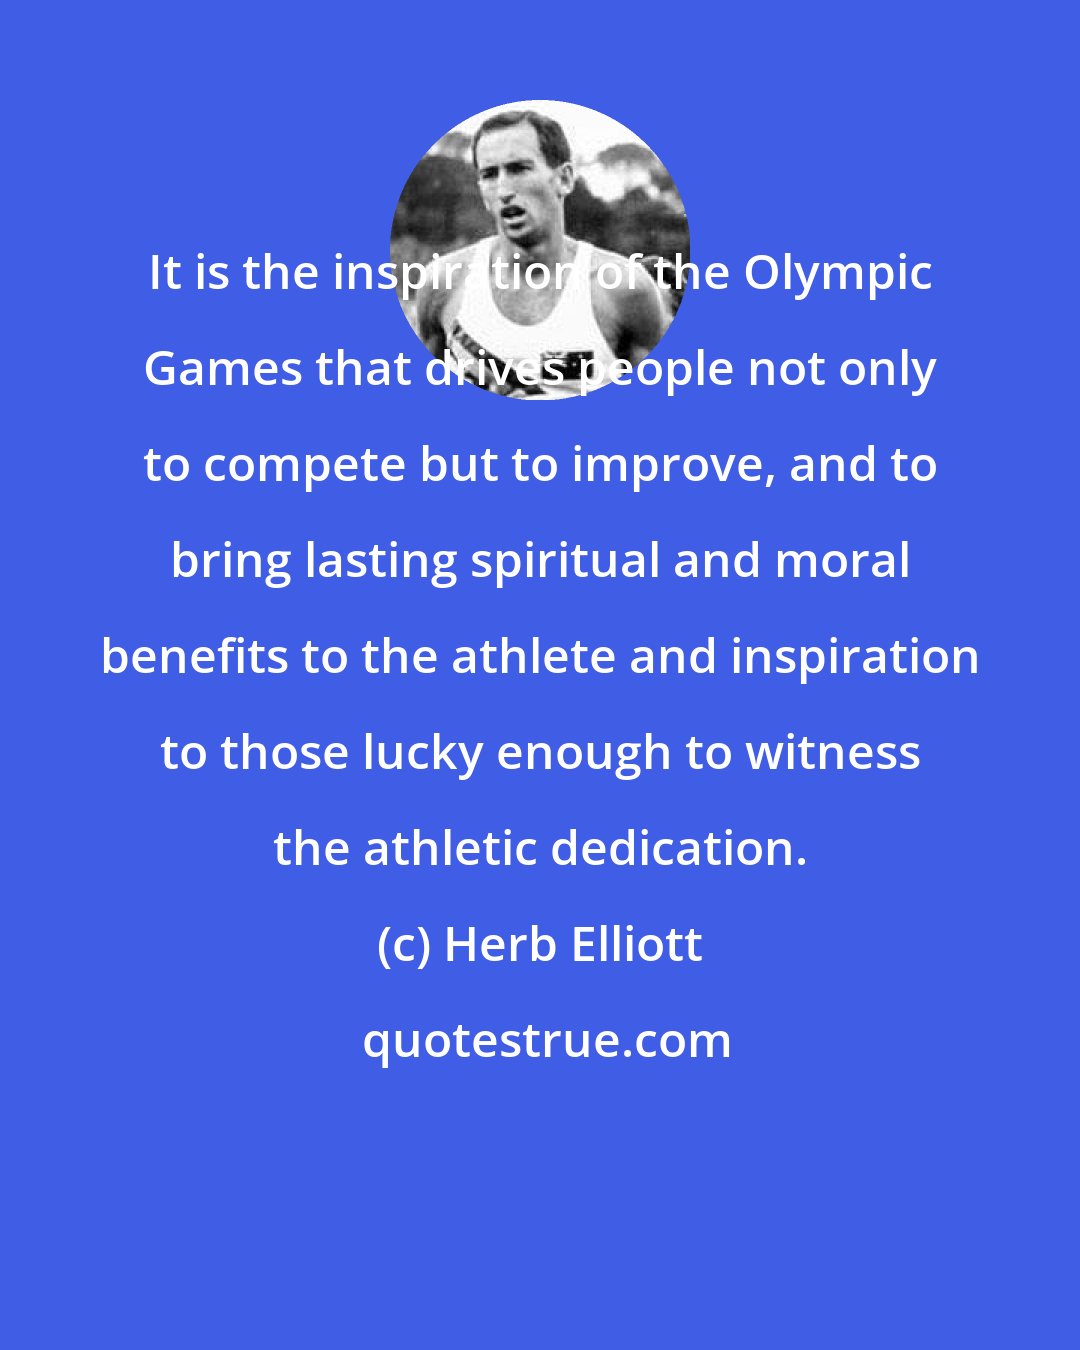 Herb Elliott: It is the inspiration of the Olympic Games that drives people not only to compete but to improve, and to bring lasting spiritual and moral benefits to the athlete and inspiration to those lucky enough to witness the athletic dedication.